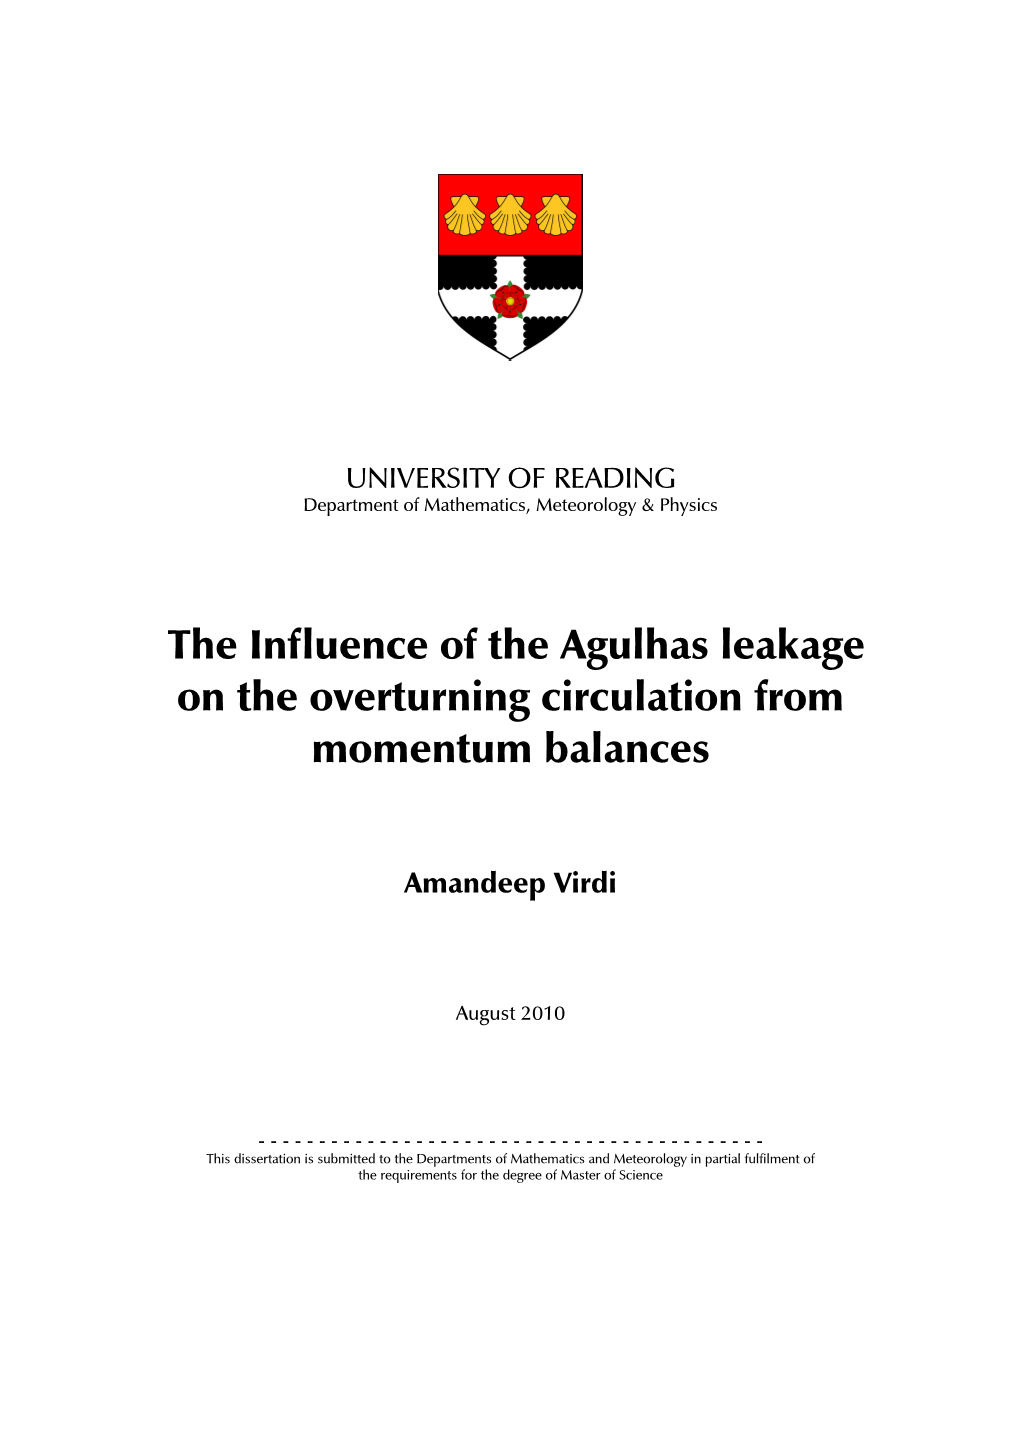 The Influence of the Agulhas Leakage on the Overturning Circulation From